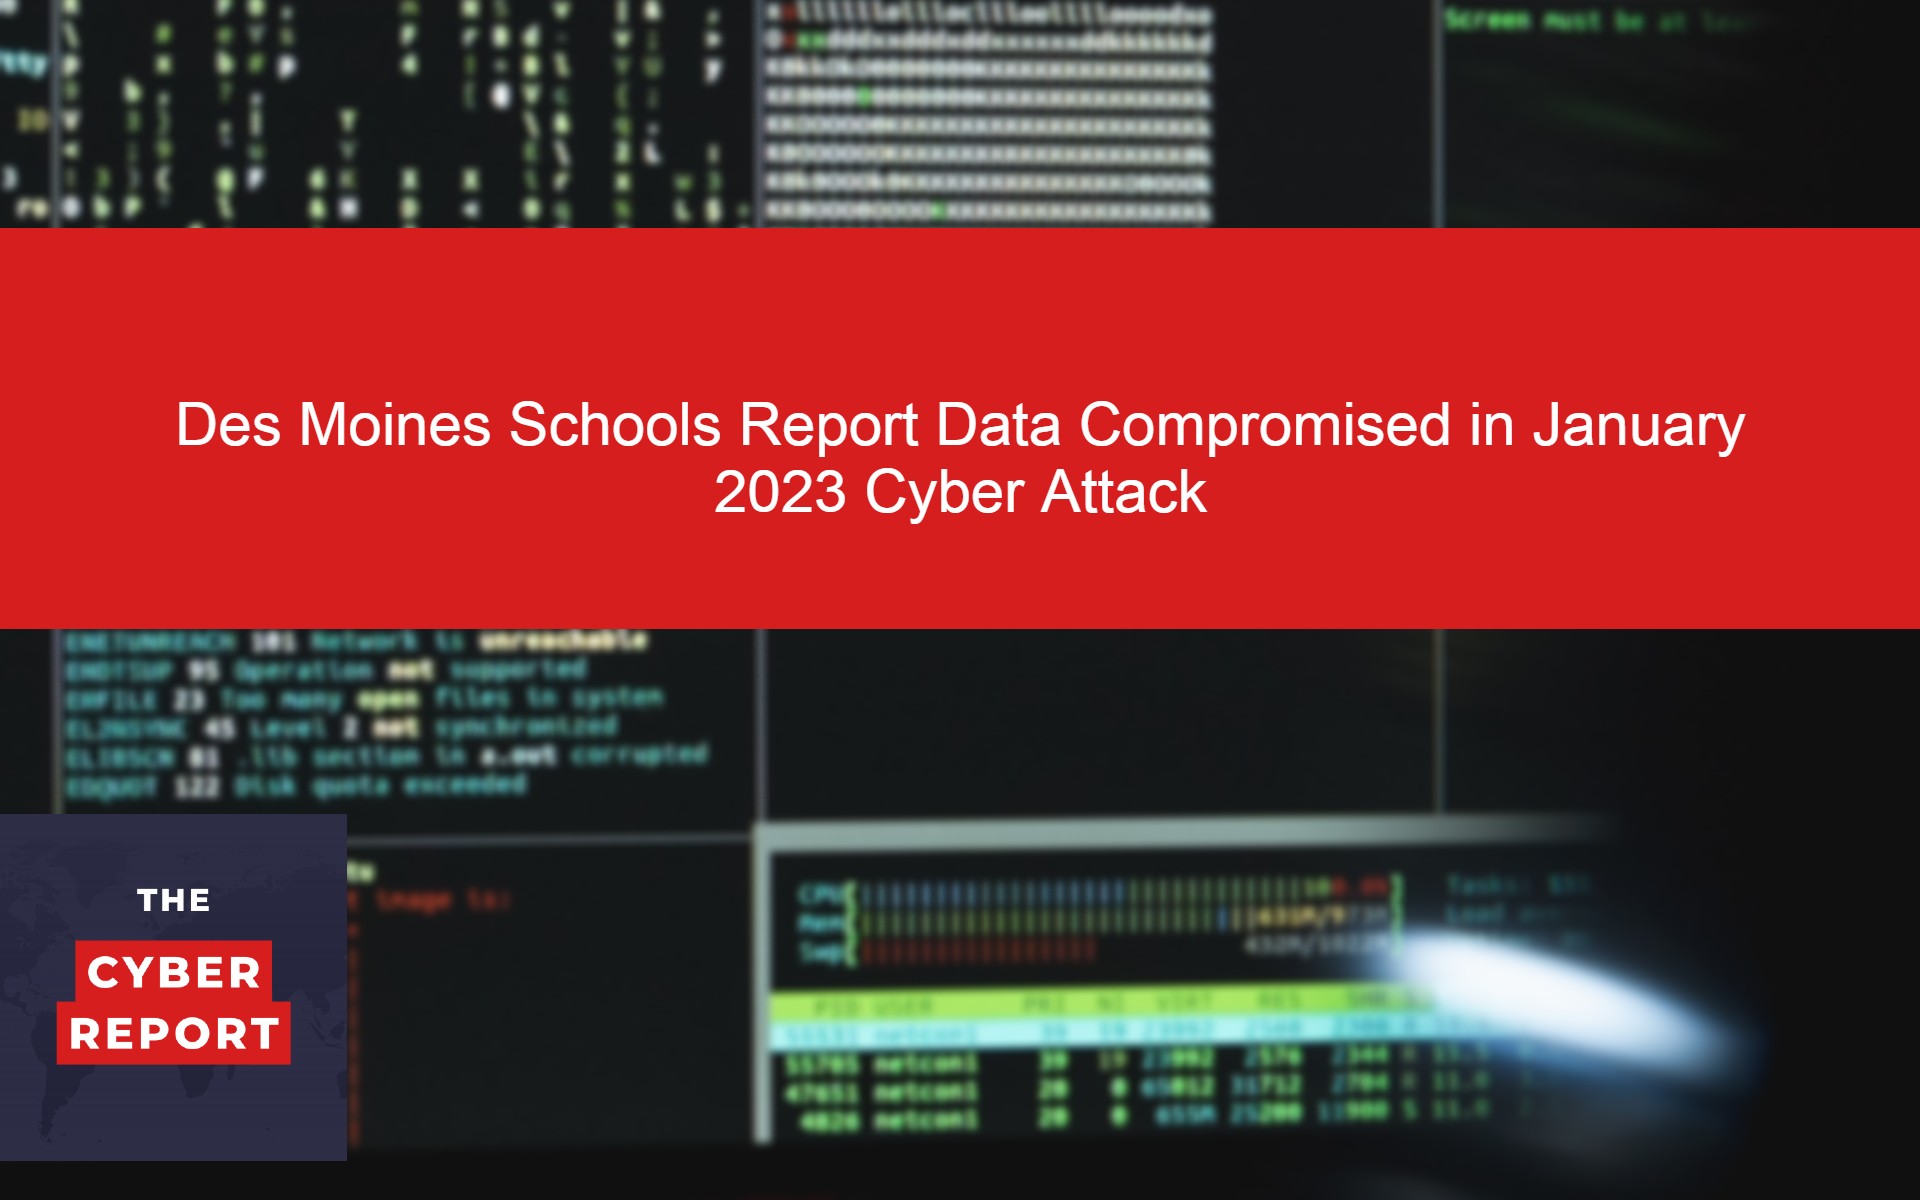 Des Moines Schools Report Data Compromised in January 2023 Cyber Attack